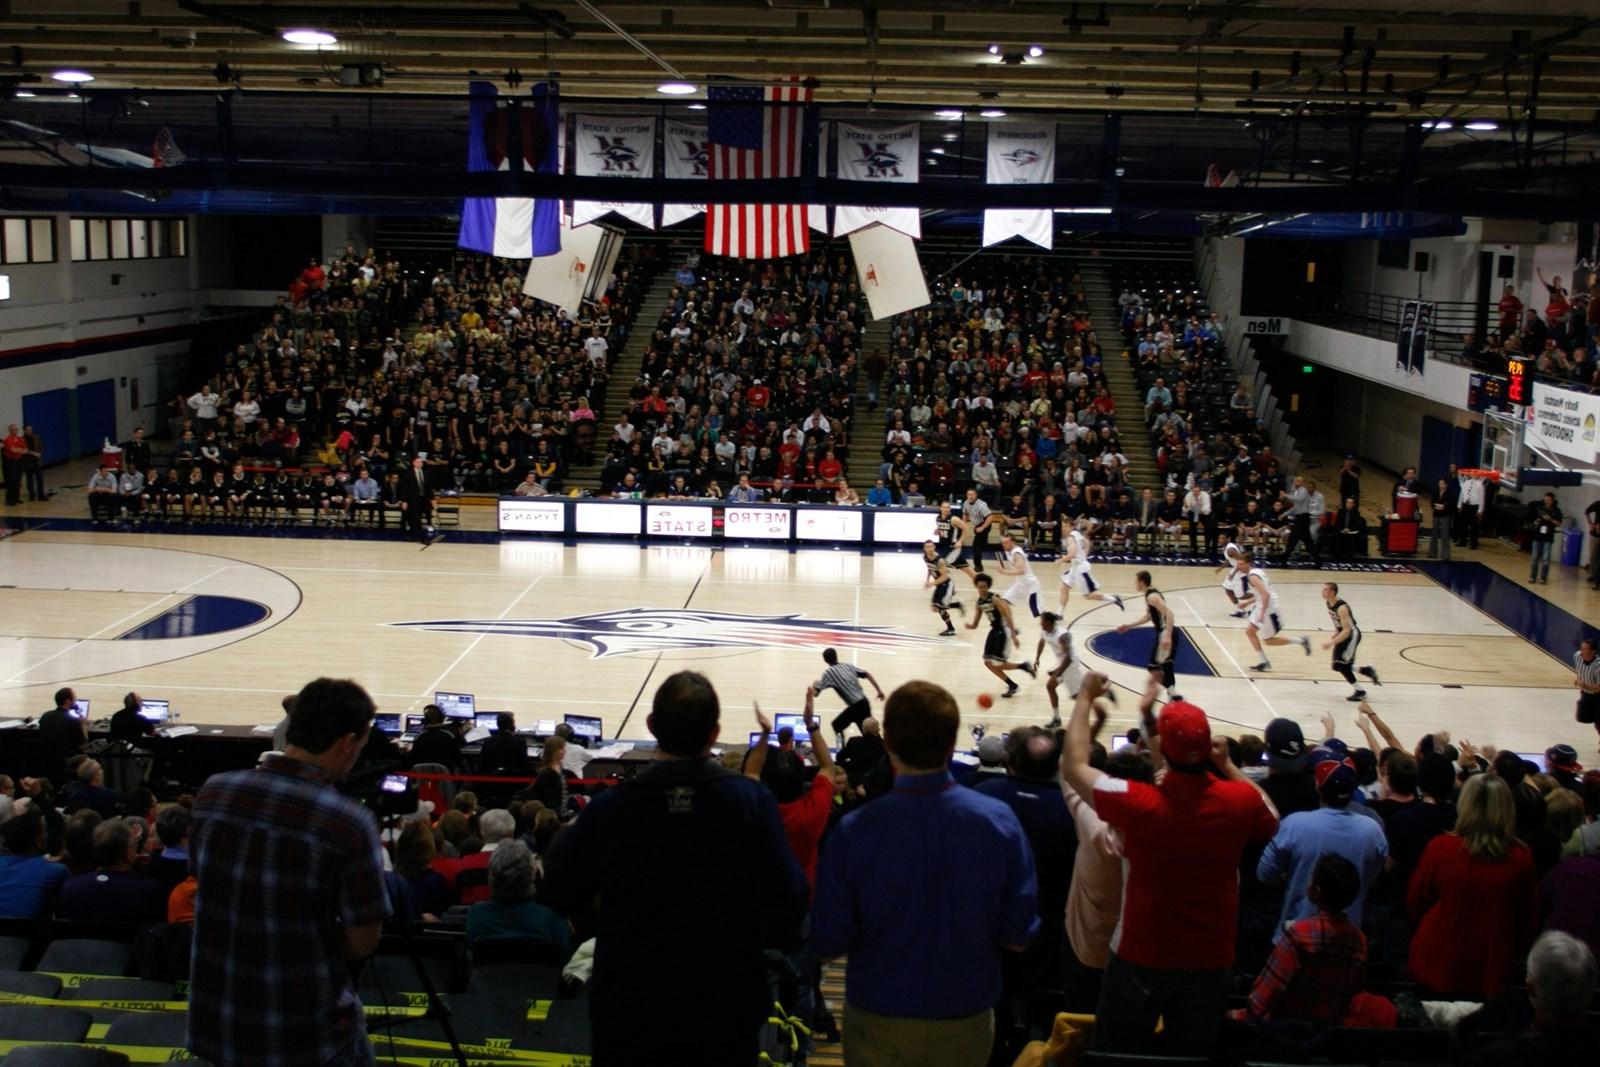 Auraria Event Center with full crowd during a men's basketball game